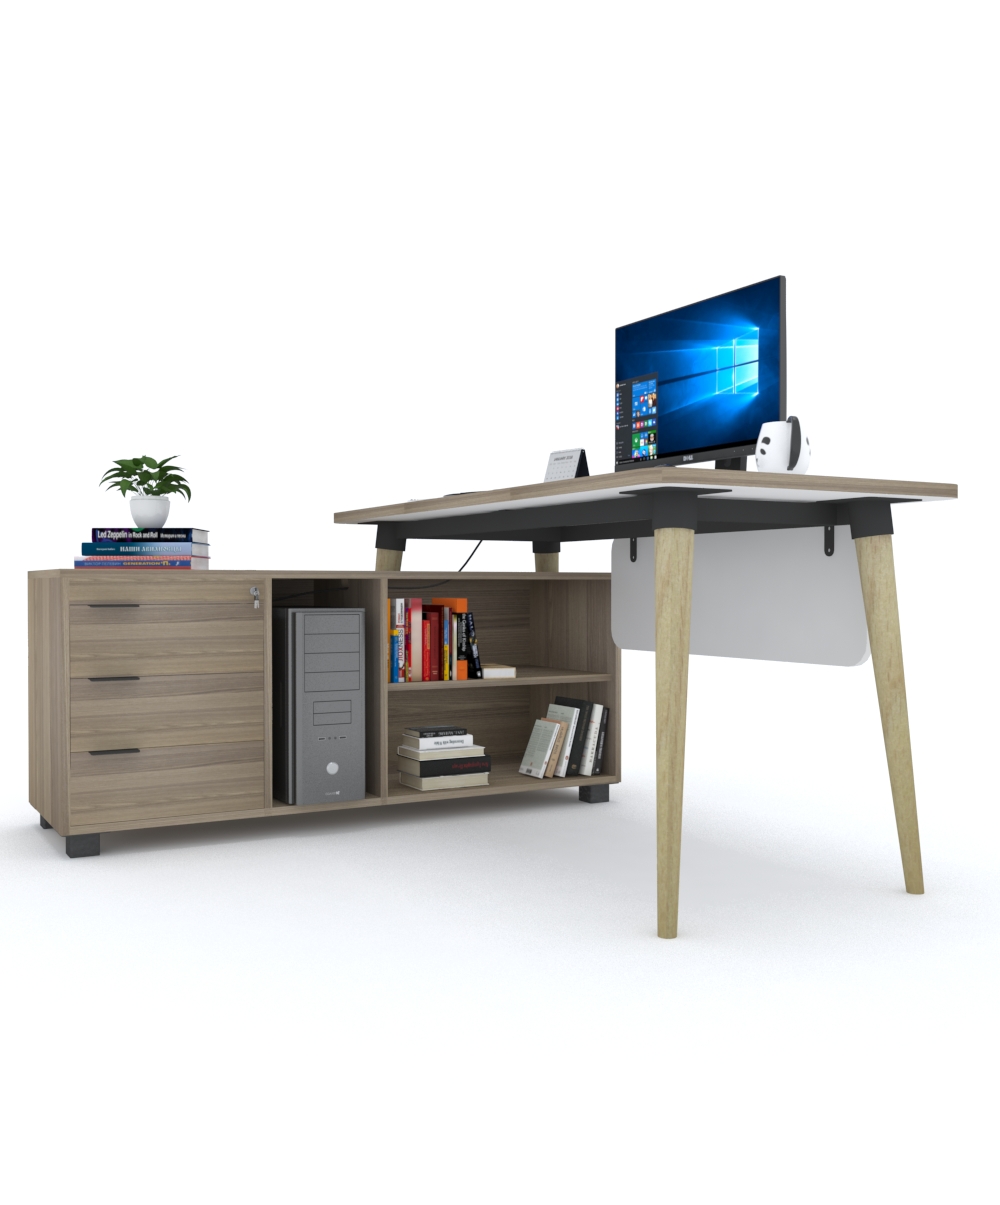 Domino Desk with side